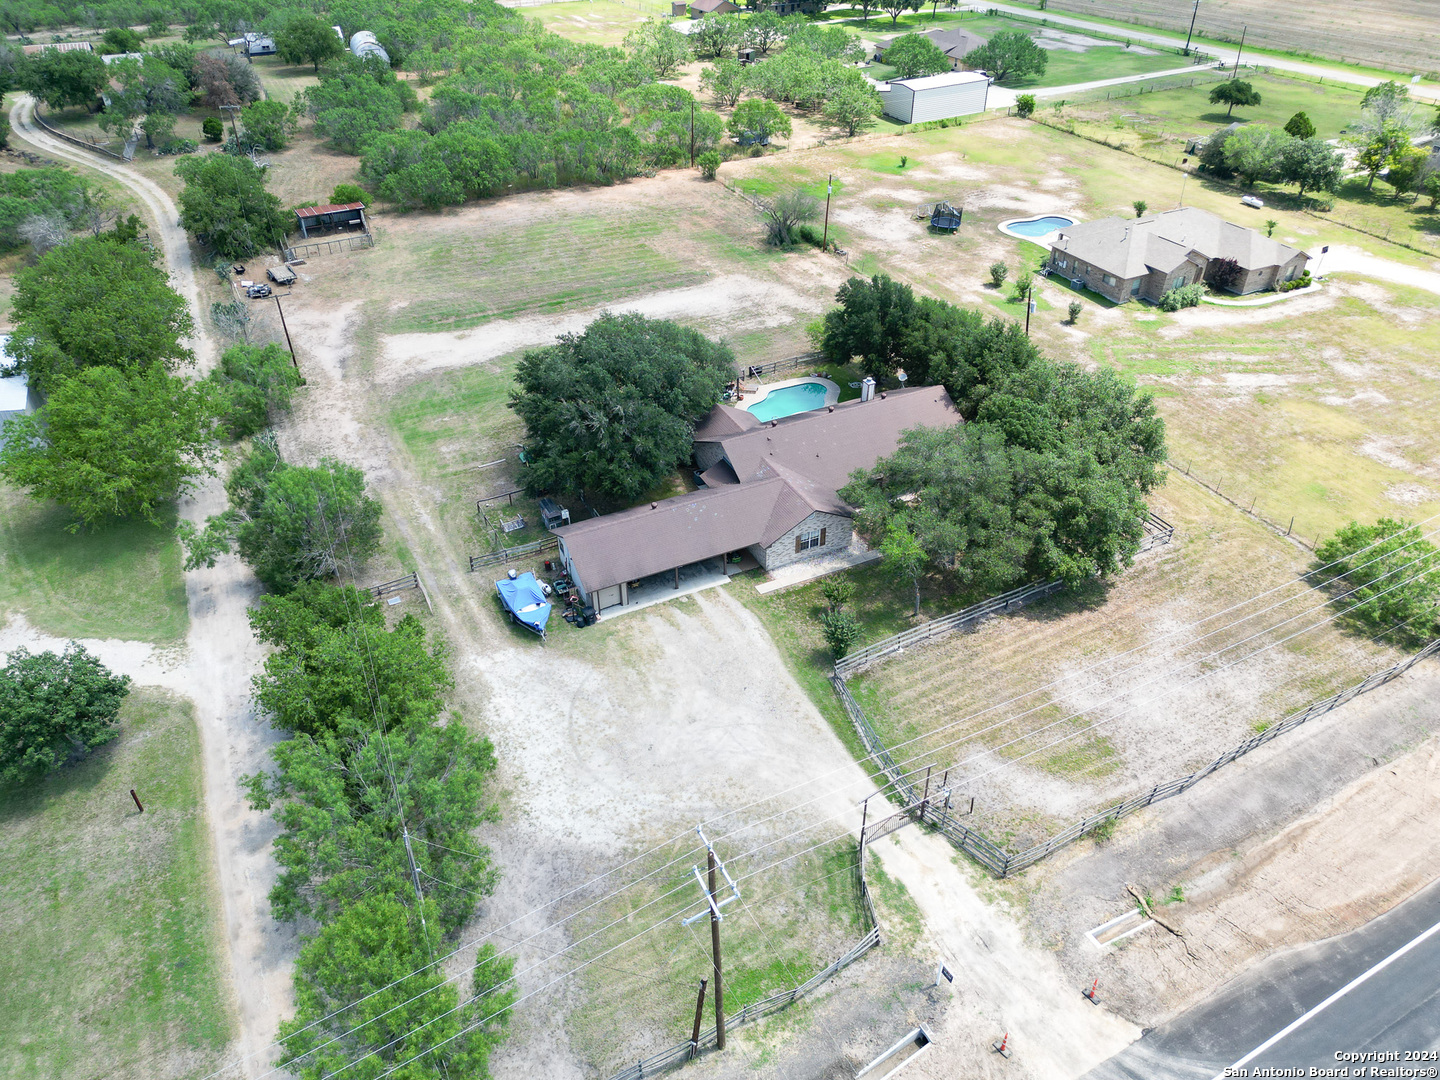 an aerial view of residential house with outdoor space